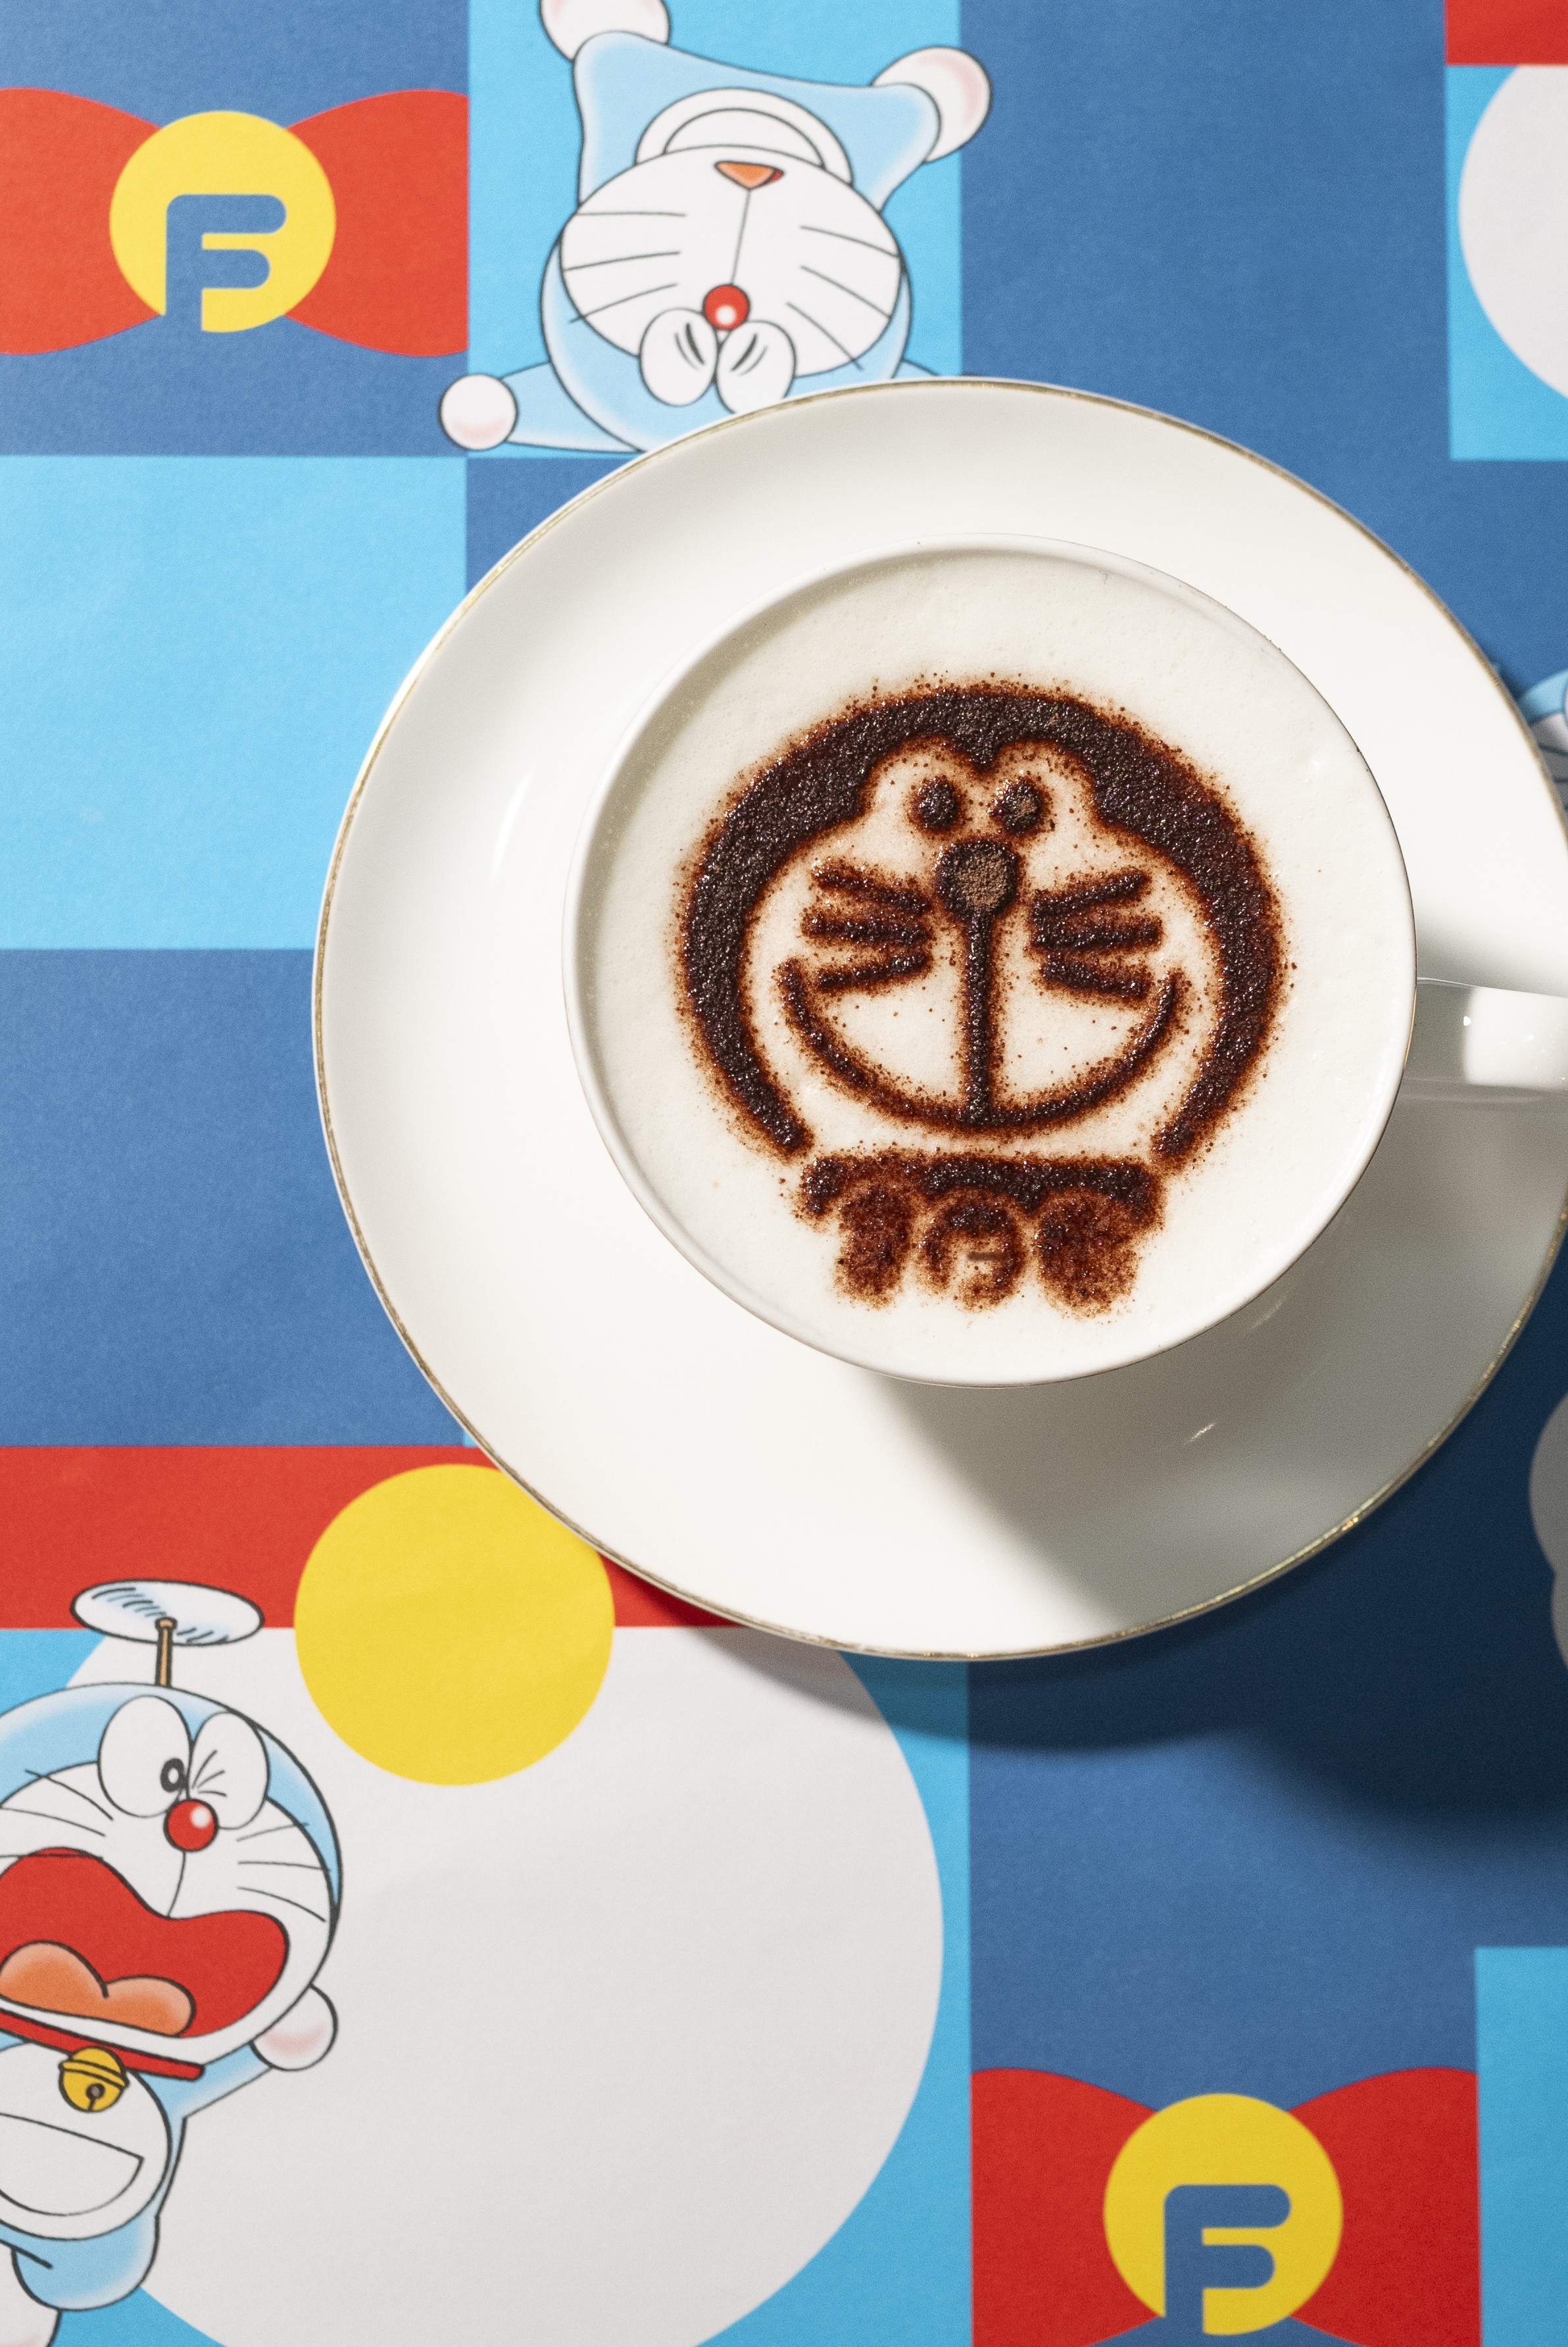 This weekend in Hong Kong, try afternoon tea with Doraemon (above), Asian food with a Korean twist, a seven-course charity dinner, cocktails from two perspectives, and catch a private chef at large. Photo: Artisan Lounge by Lubuds